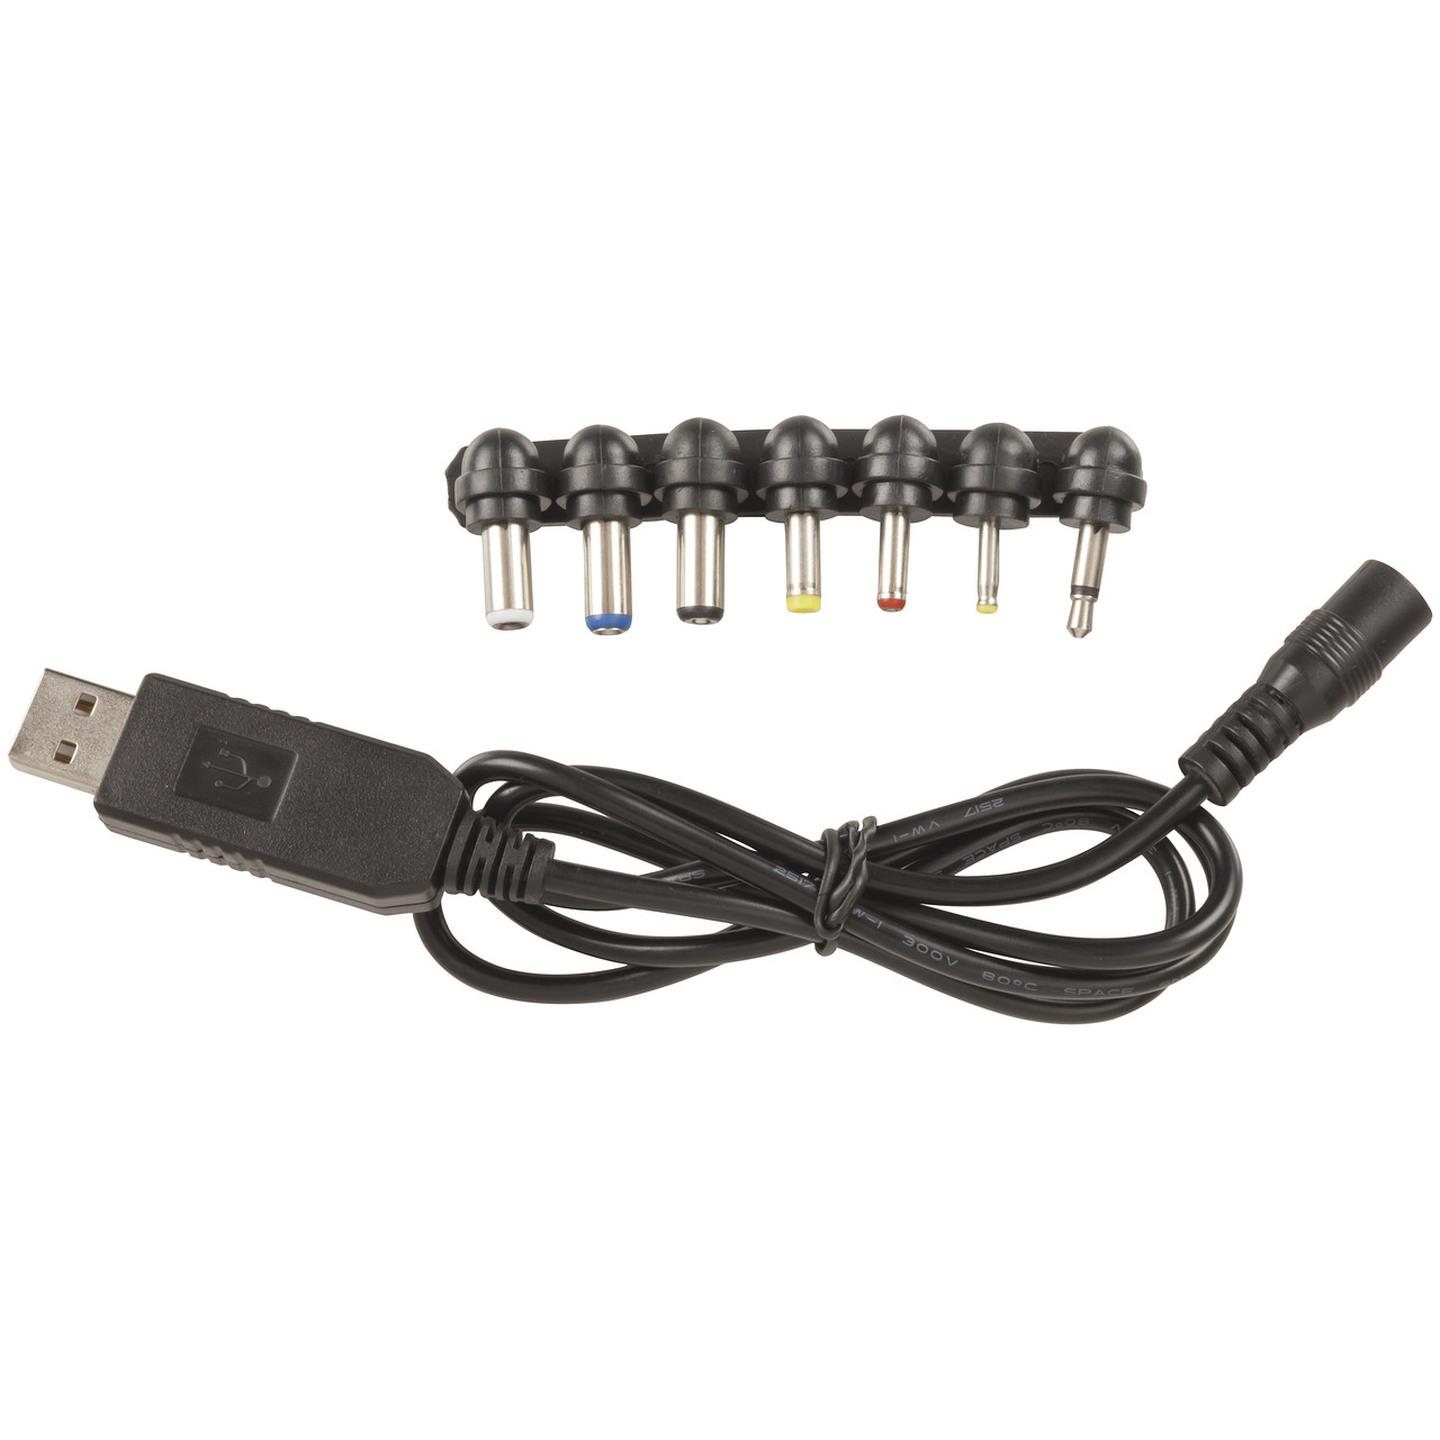 Universal USB 9V Step-Up Power Cable